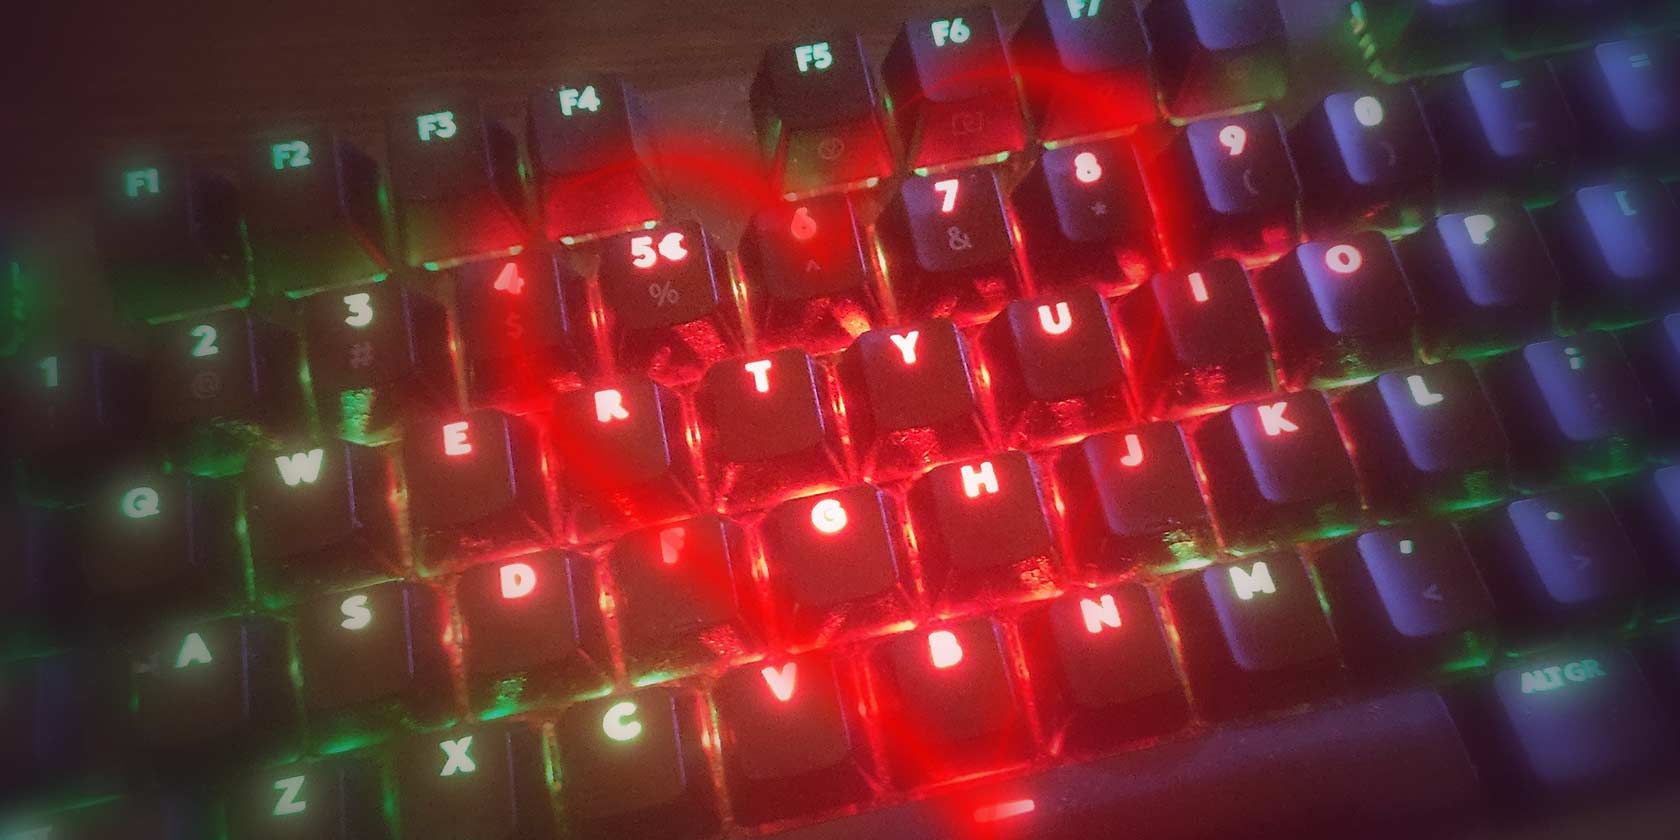 to Create Your “Light Maps” Your Logitech Keyboard